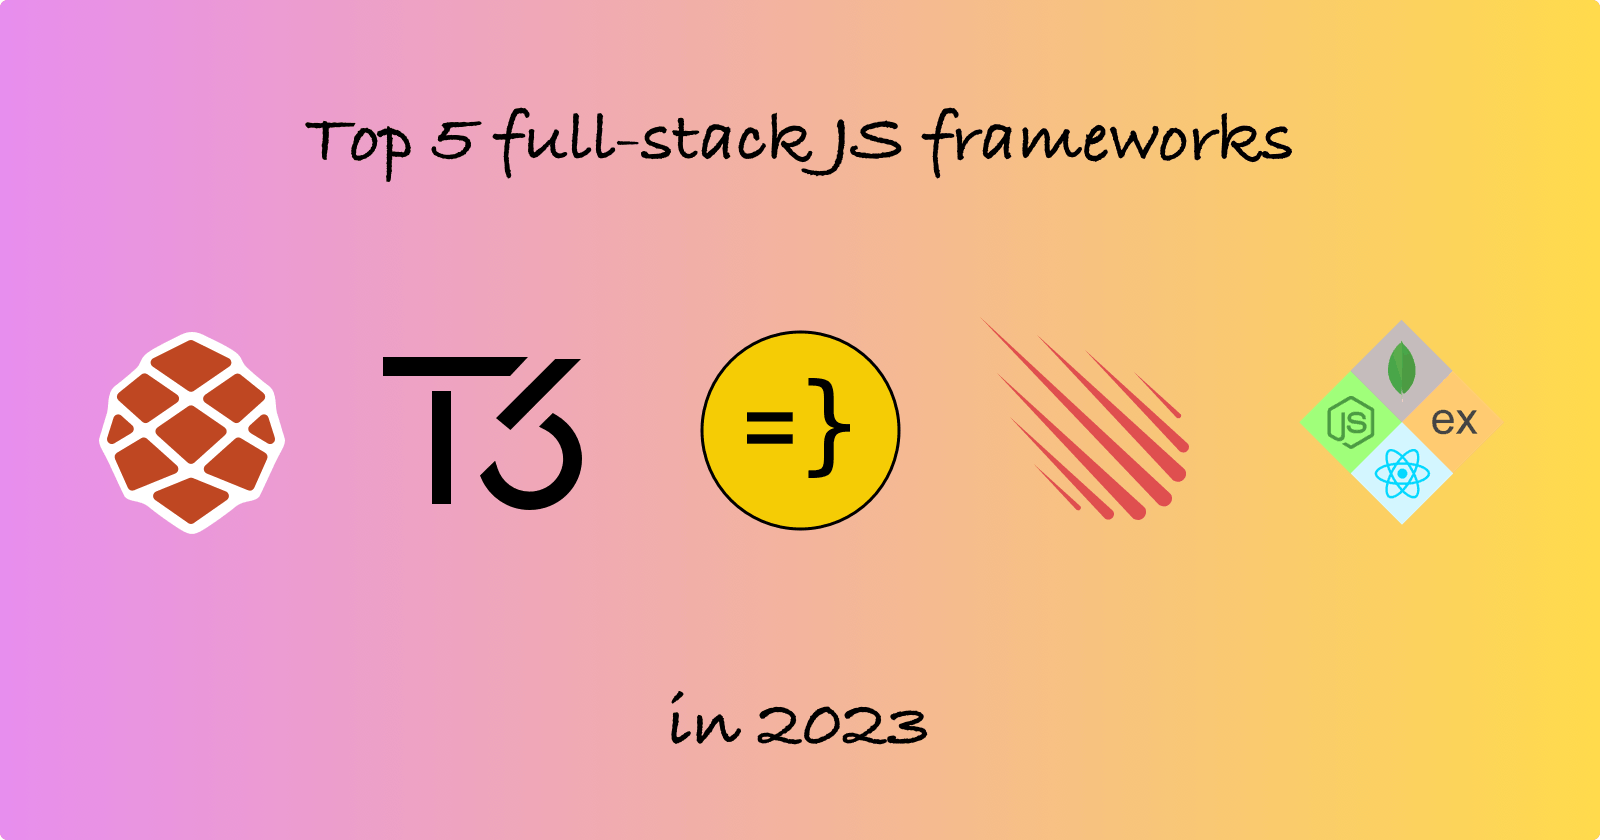 🏆 Top 5 full-stack JS frameworks in 2023 - which one should you pick for your next project? 🤔